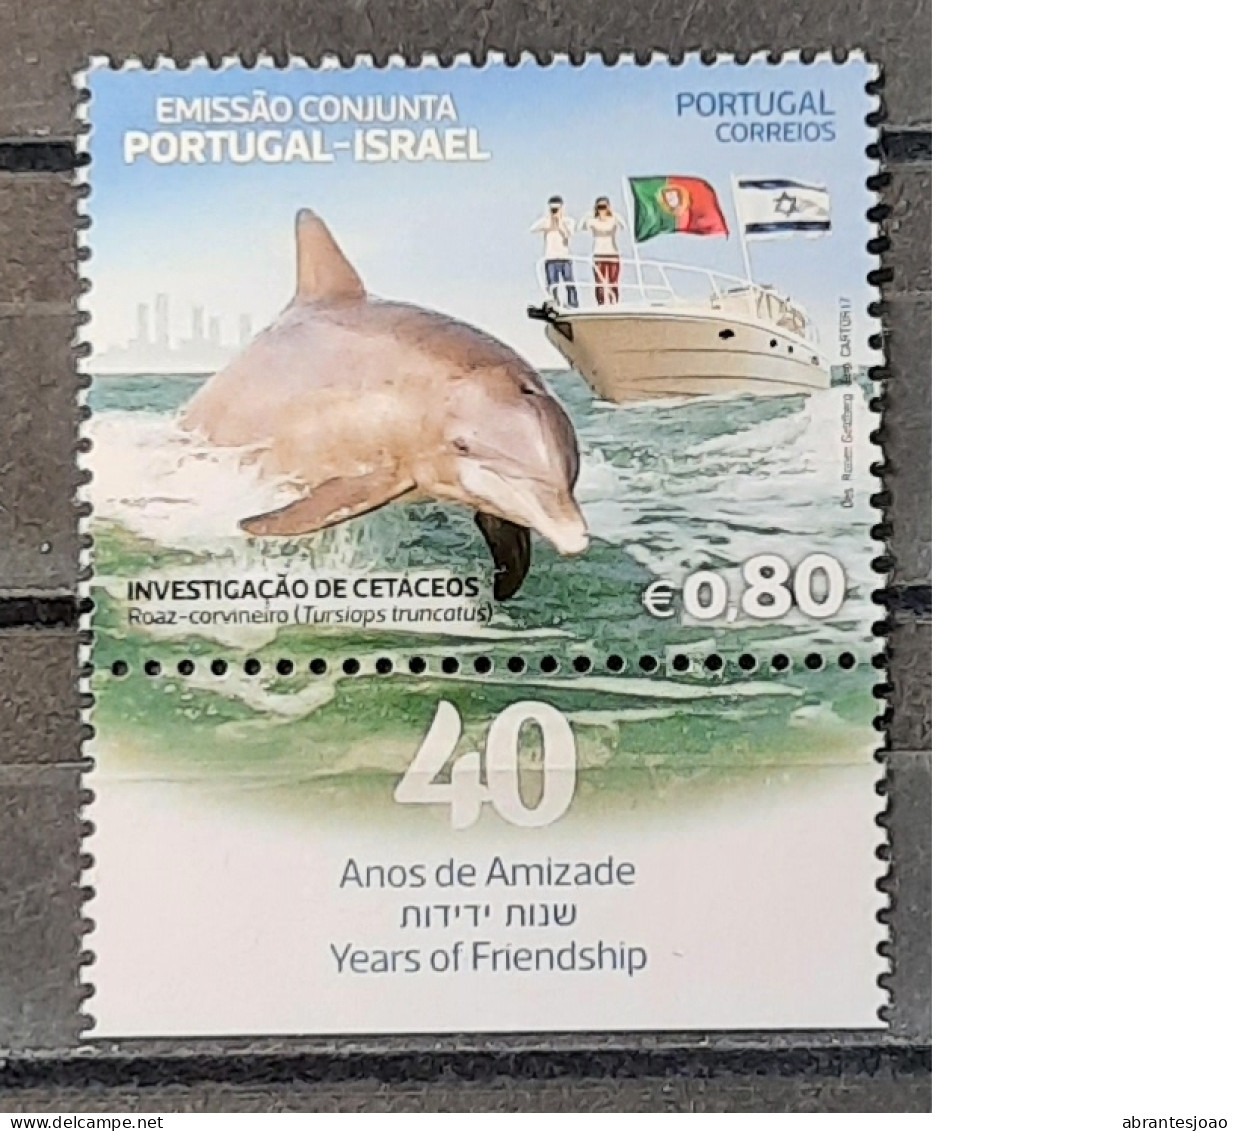 2017 - Portugal - MNH - Joint With Israel -40 Years Of Friendship - Dolphins - 2 Stamps - Nuevos